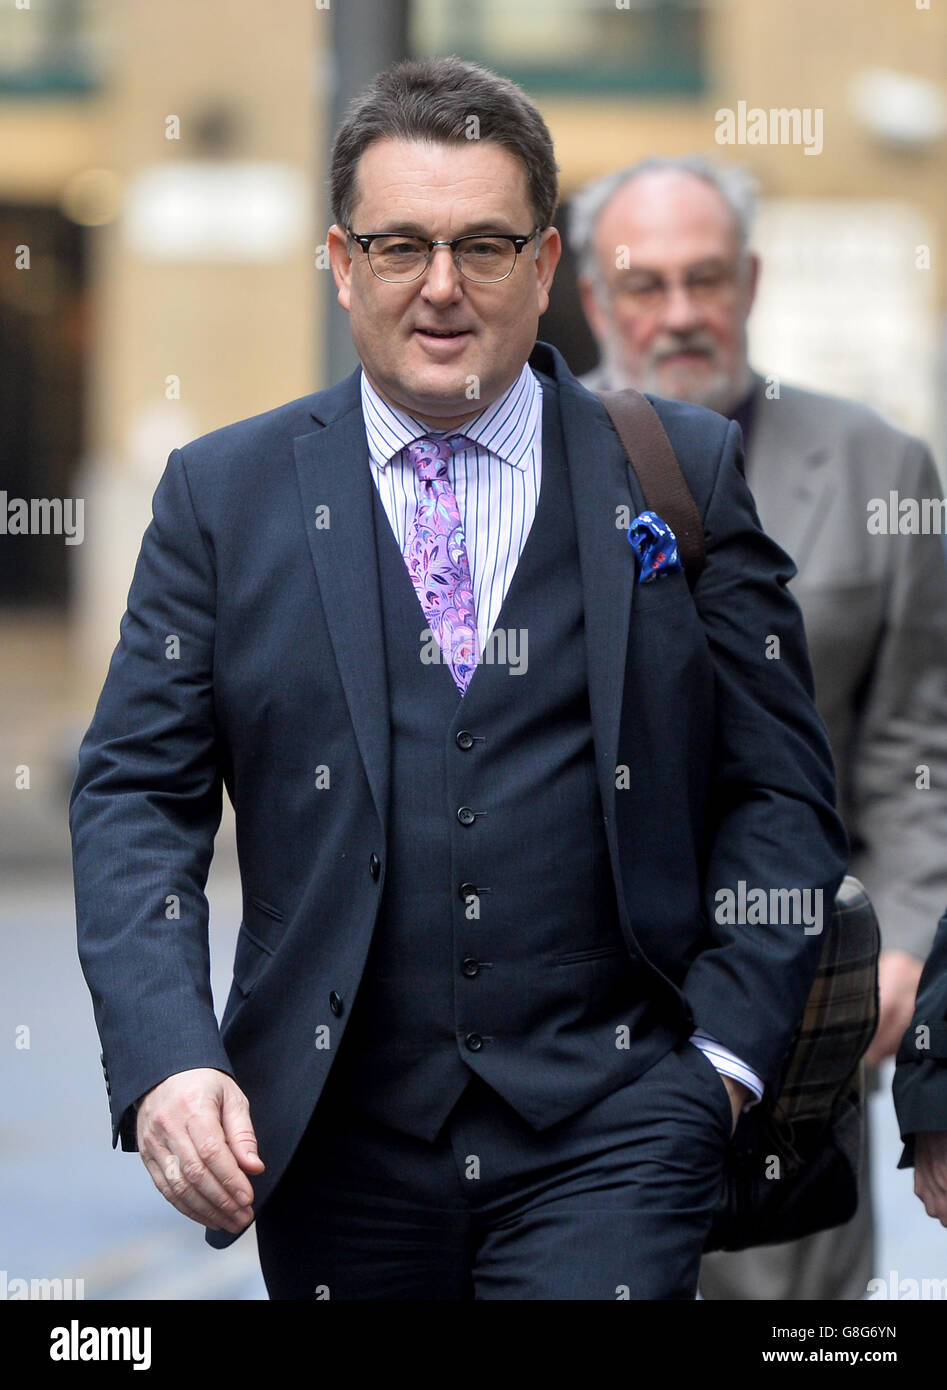 Andrew Fitch-Holland, arrives at Southwark Crown Court, London, where he denies perverting the course of justice, in connection with former New Zealand captain Chris Cairns' libel action against former IPL head Lalit Modi. Stock Photo